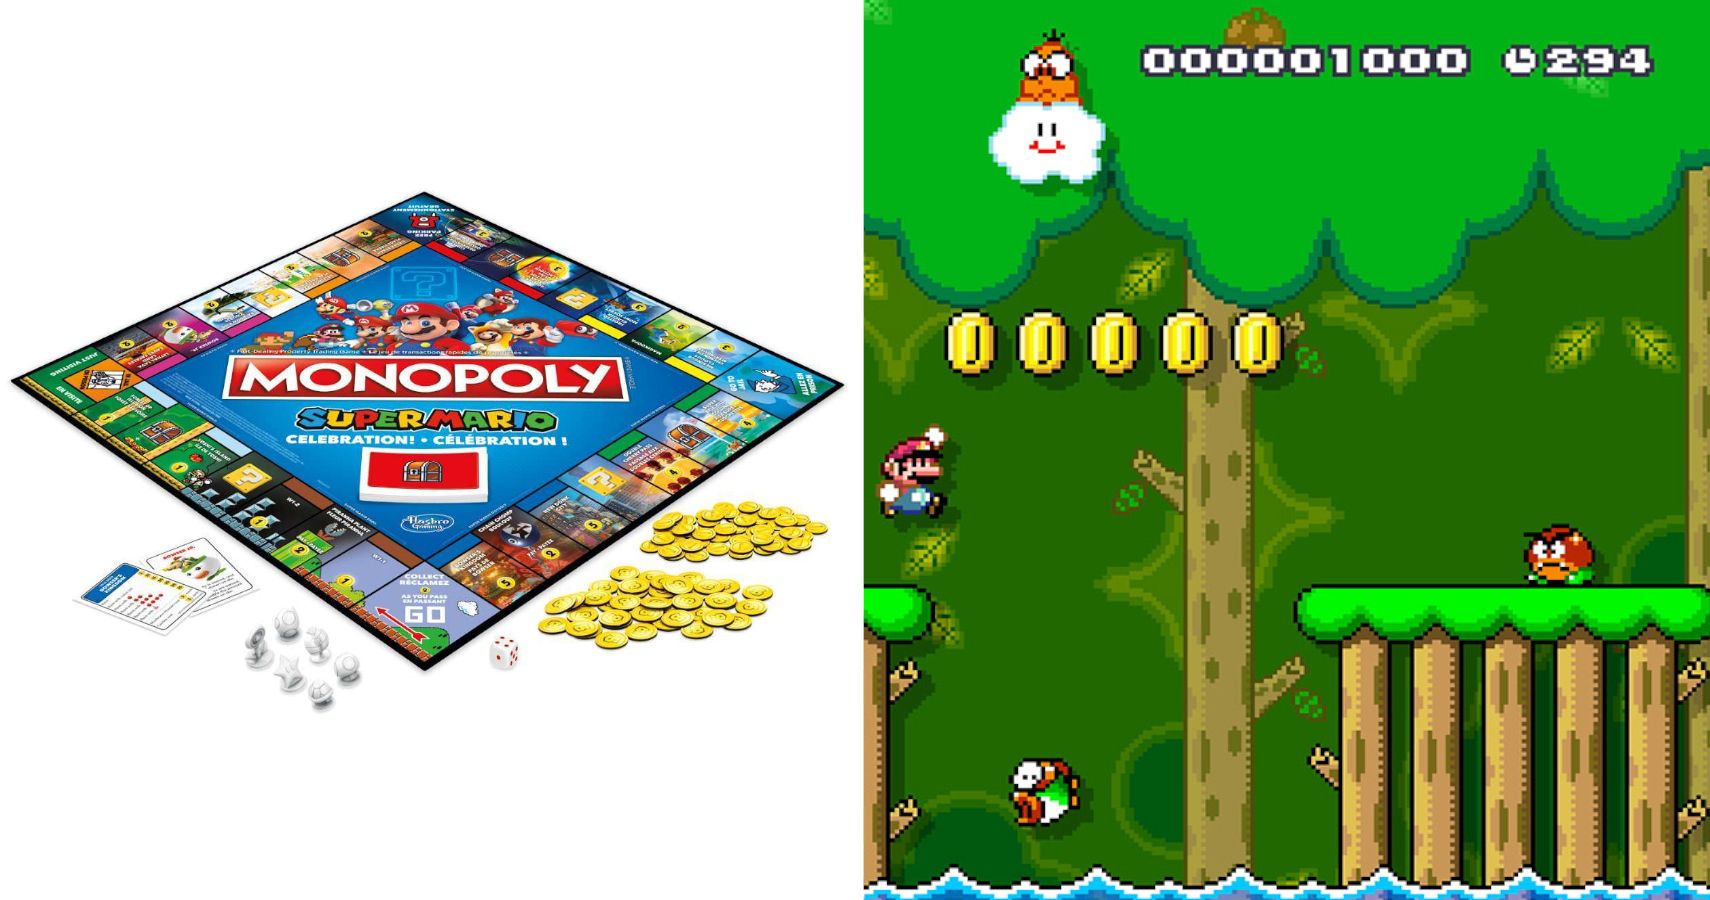 Wahoo! Super Mario Bros. Monopoly & Jenga Are Almost Here - The Toy Insider